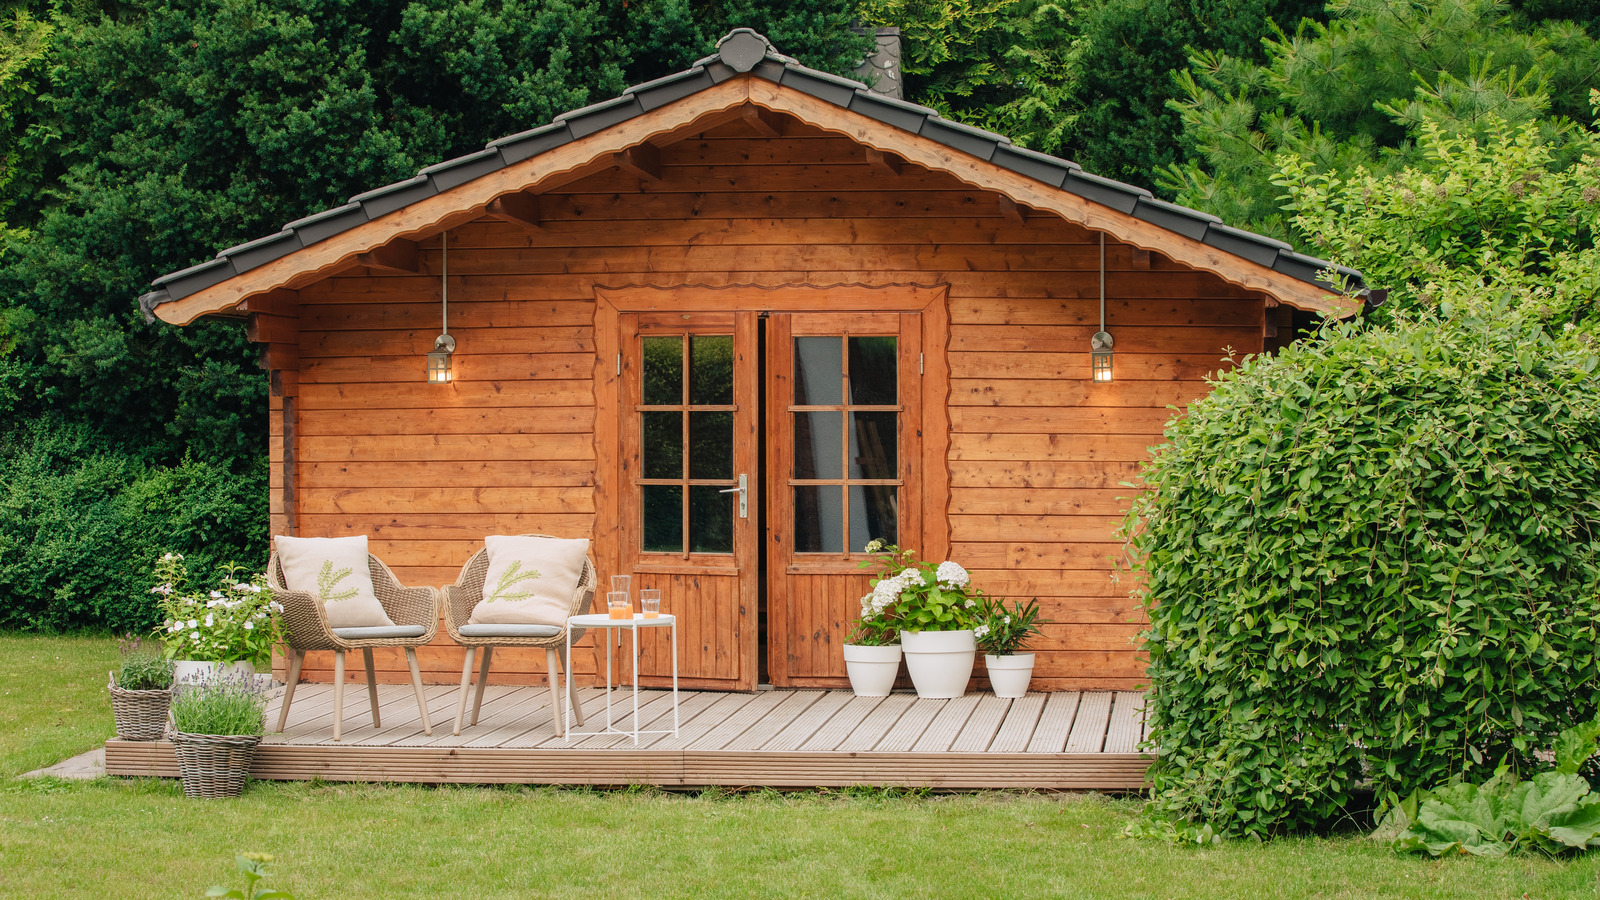 Cost To Build A Shed Yourself - Encycloall